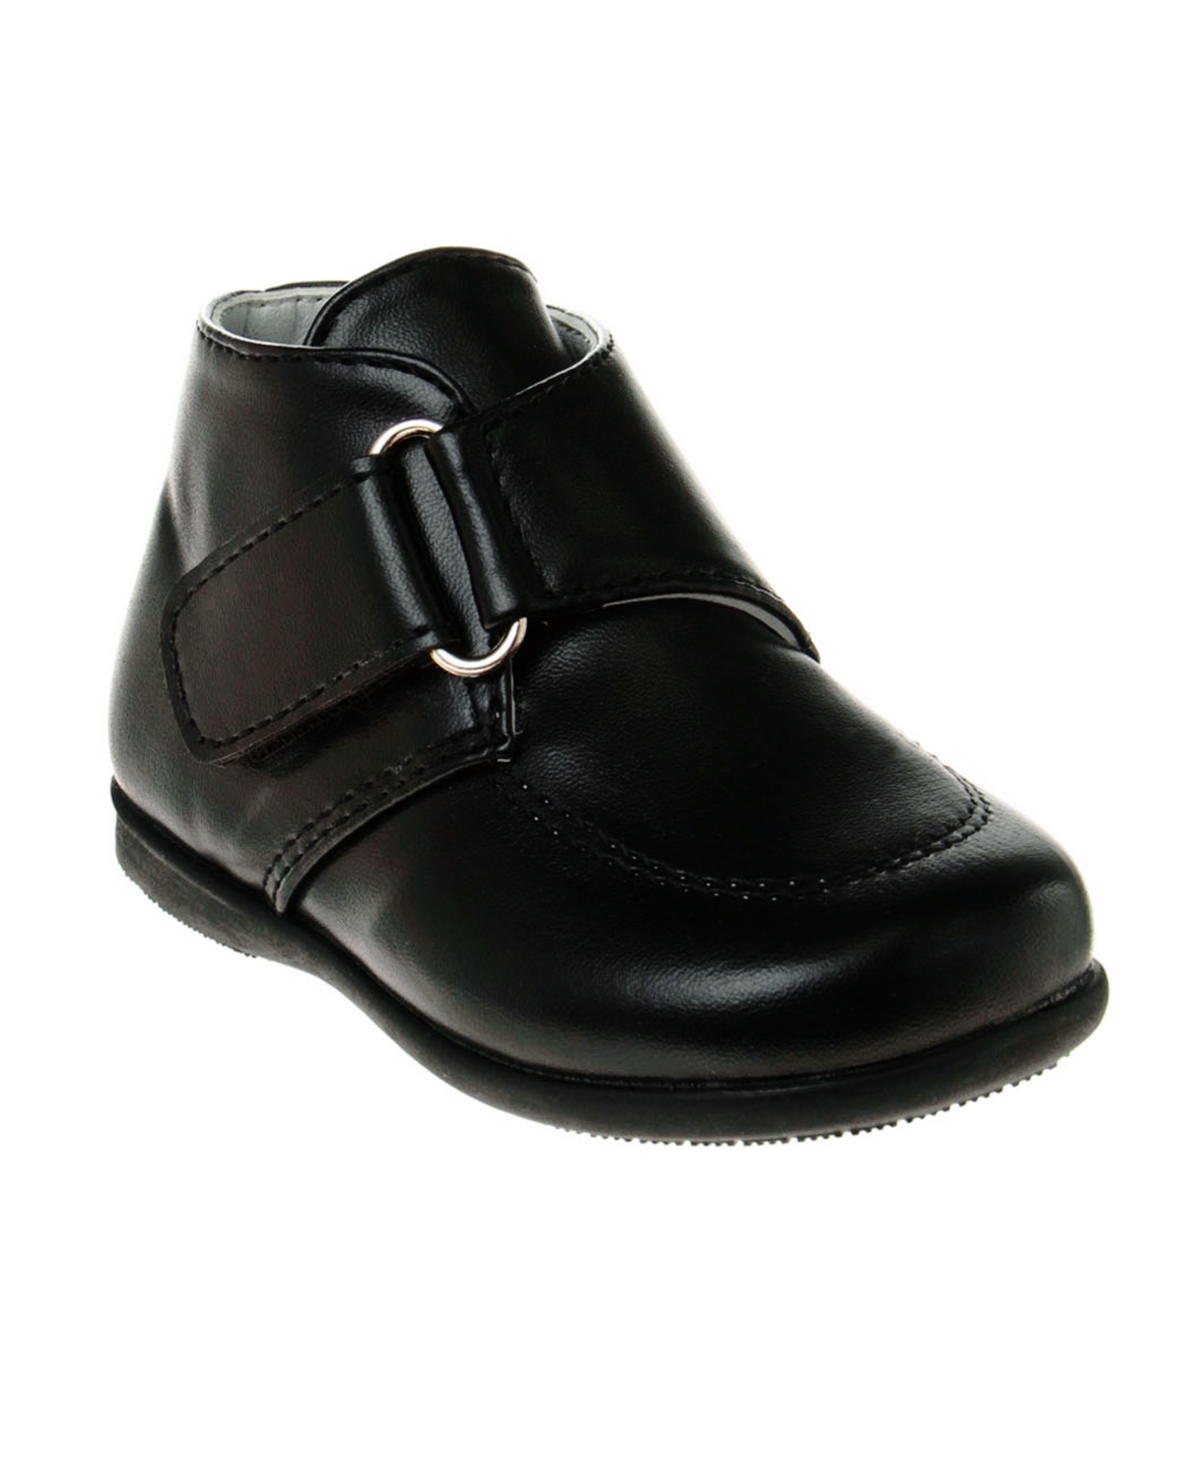 Josmo Kids' Toddler Boys Hook And Loop Straps Dress Shoes In Black